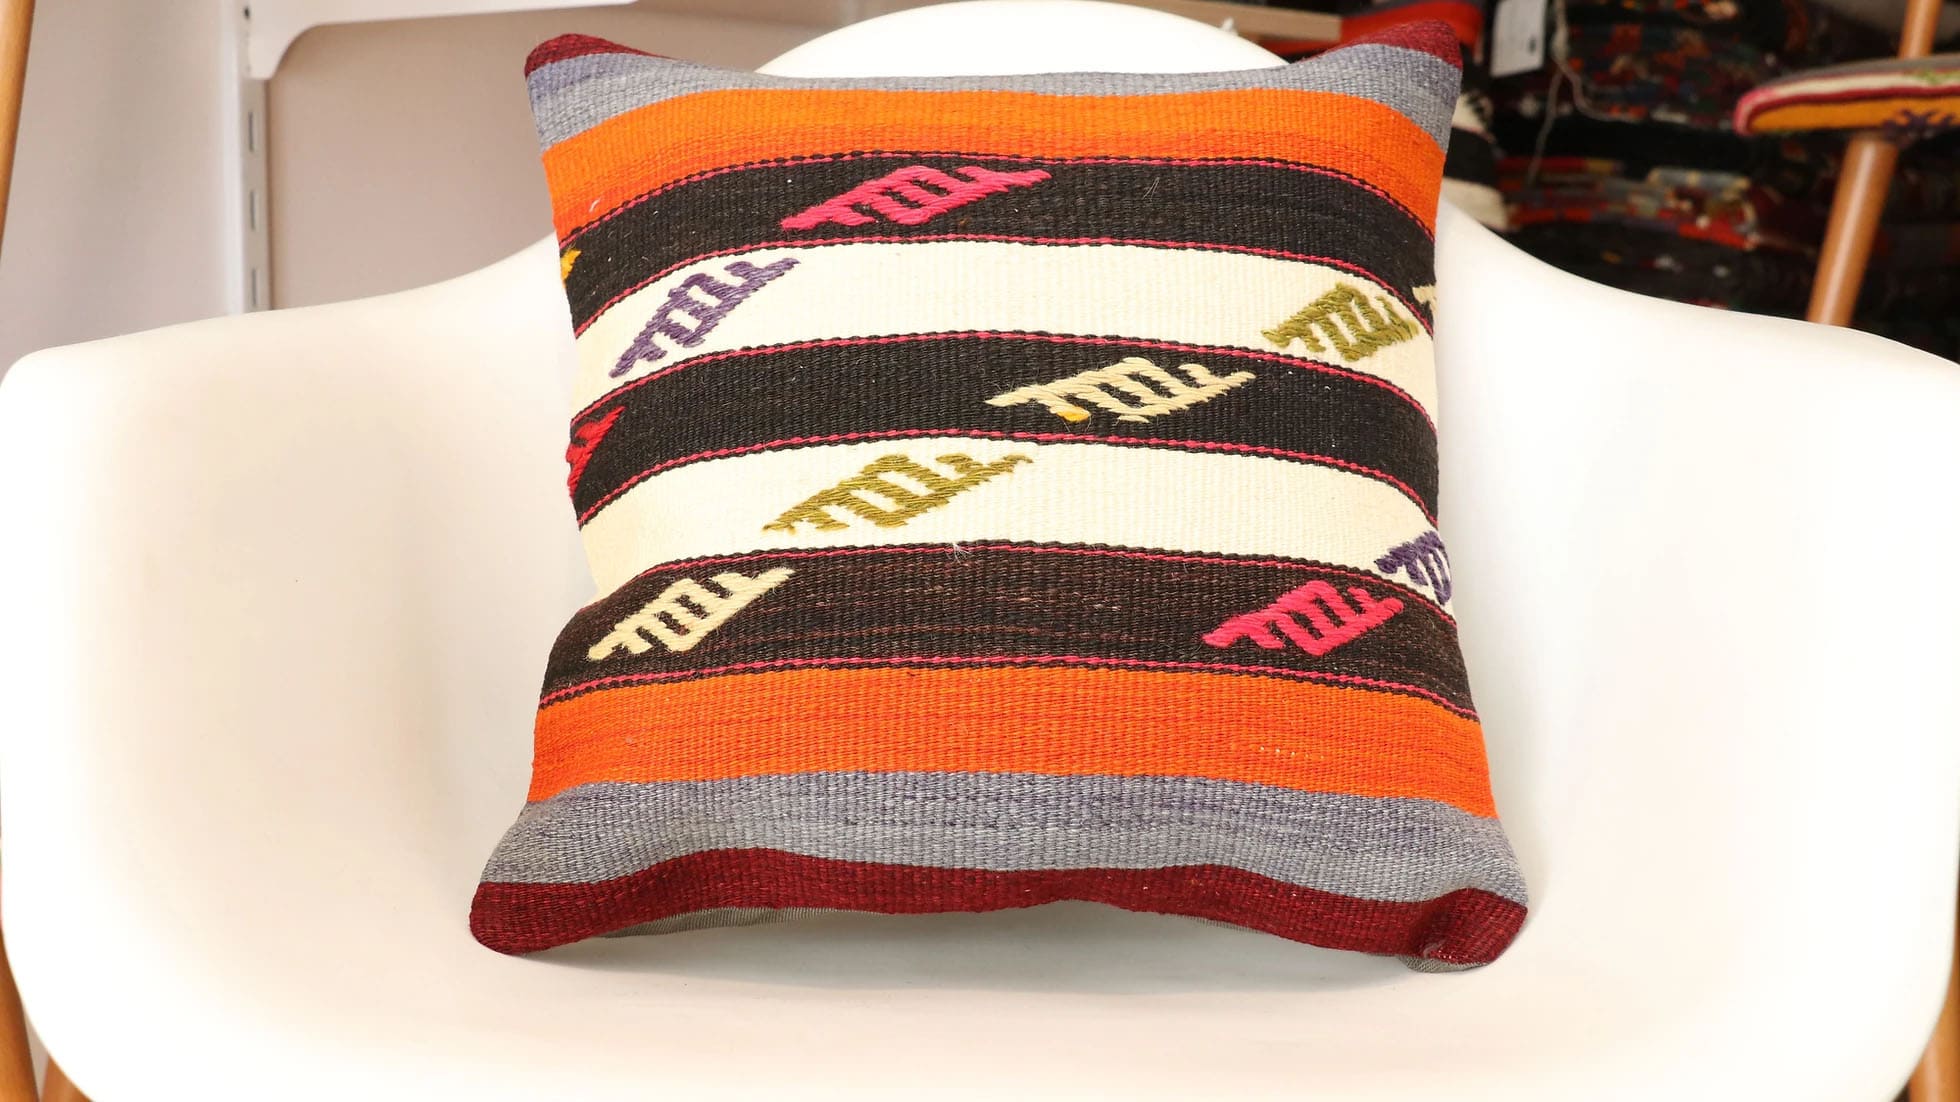 Vintage Rustic Kilim Cushion with Colorful Stripes and Motifs by Kilim Couture NYC Rug Store